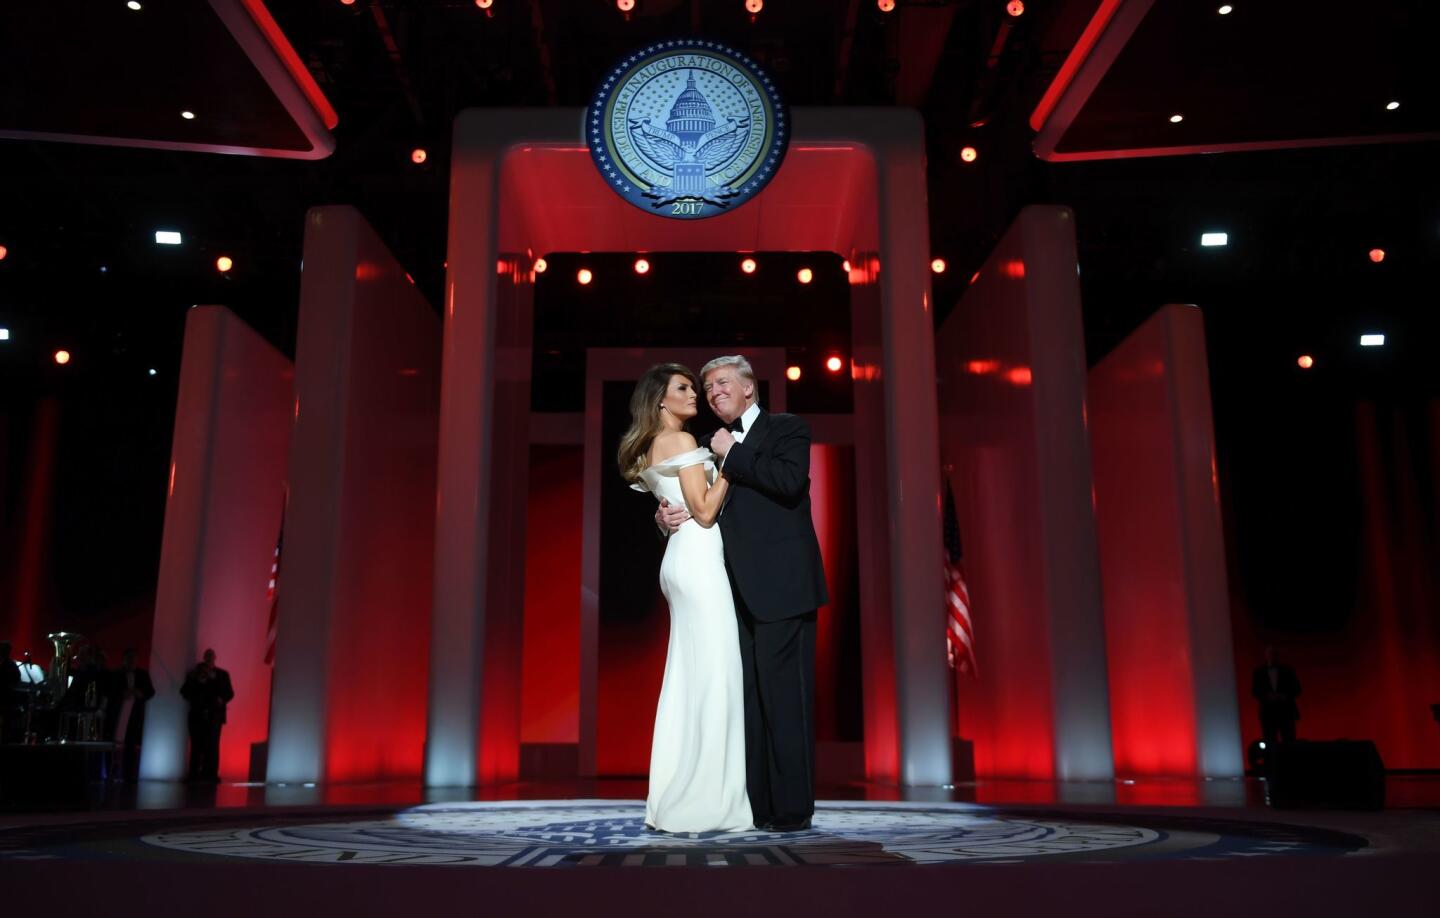 US President Donald Trump and the first lady Melania Trump dance at the Liberty Ball at the Washington DC Convention Center.